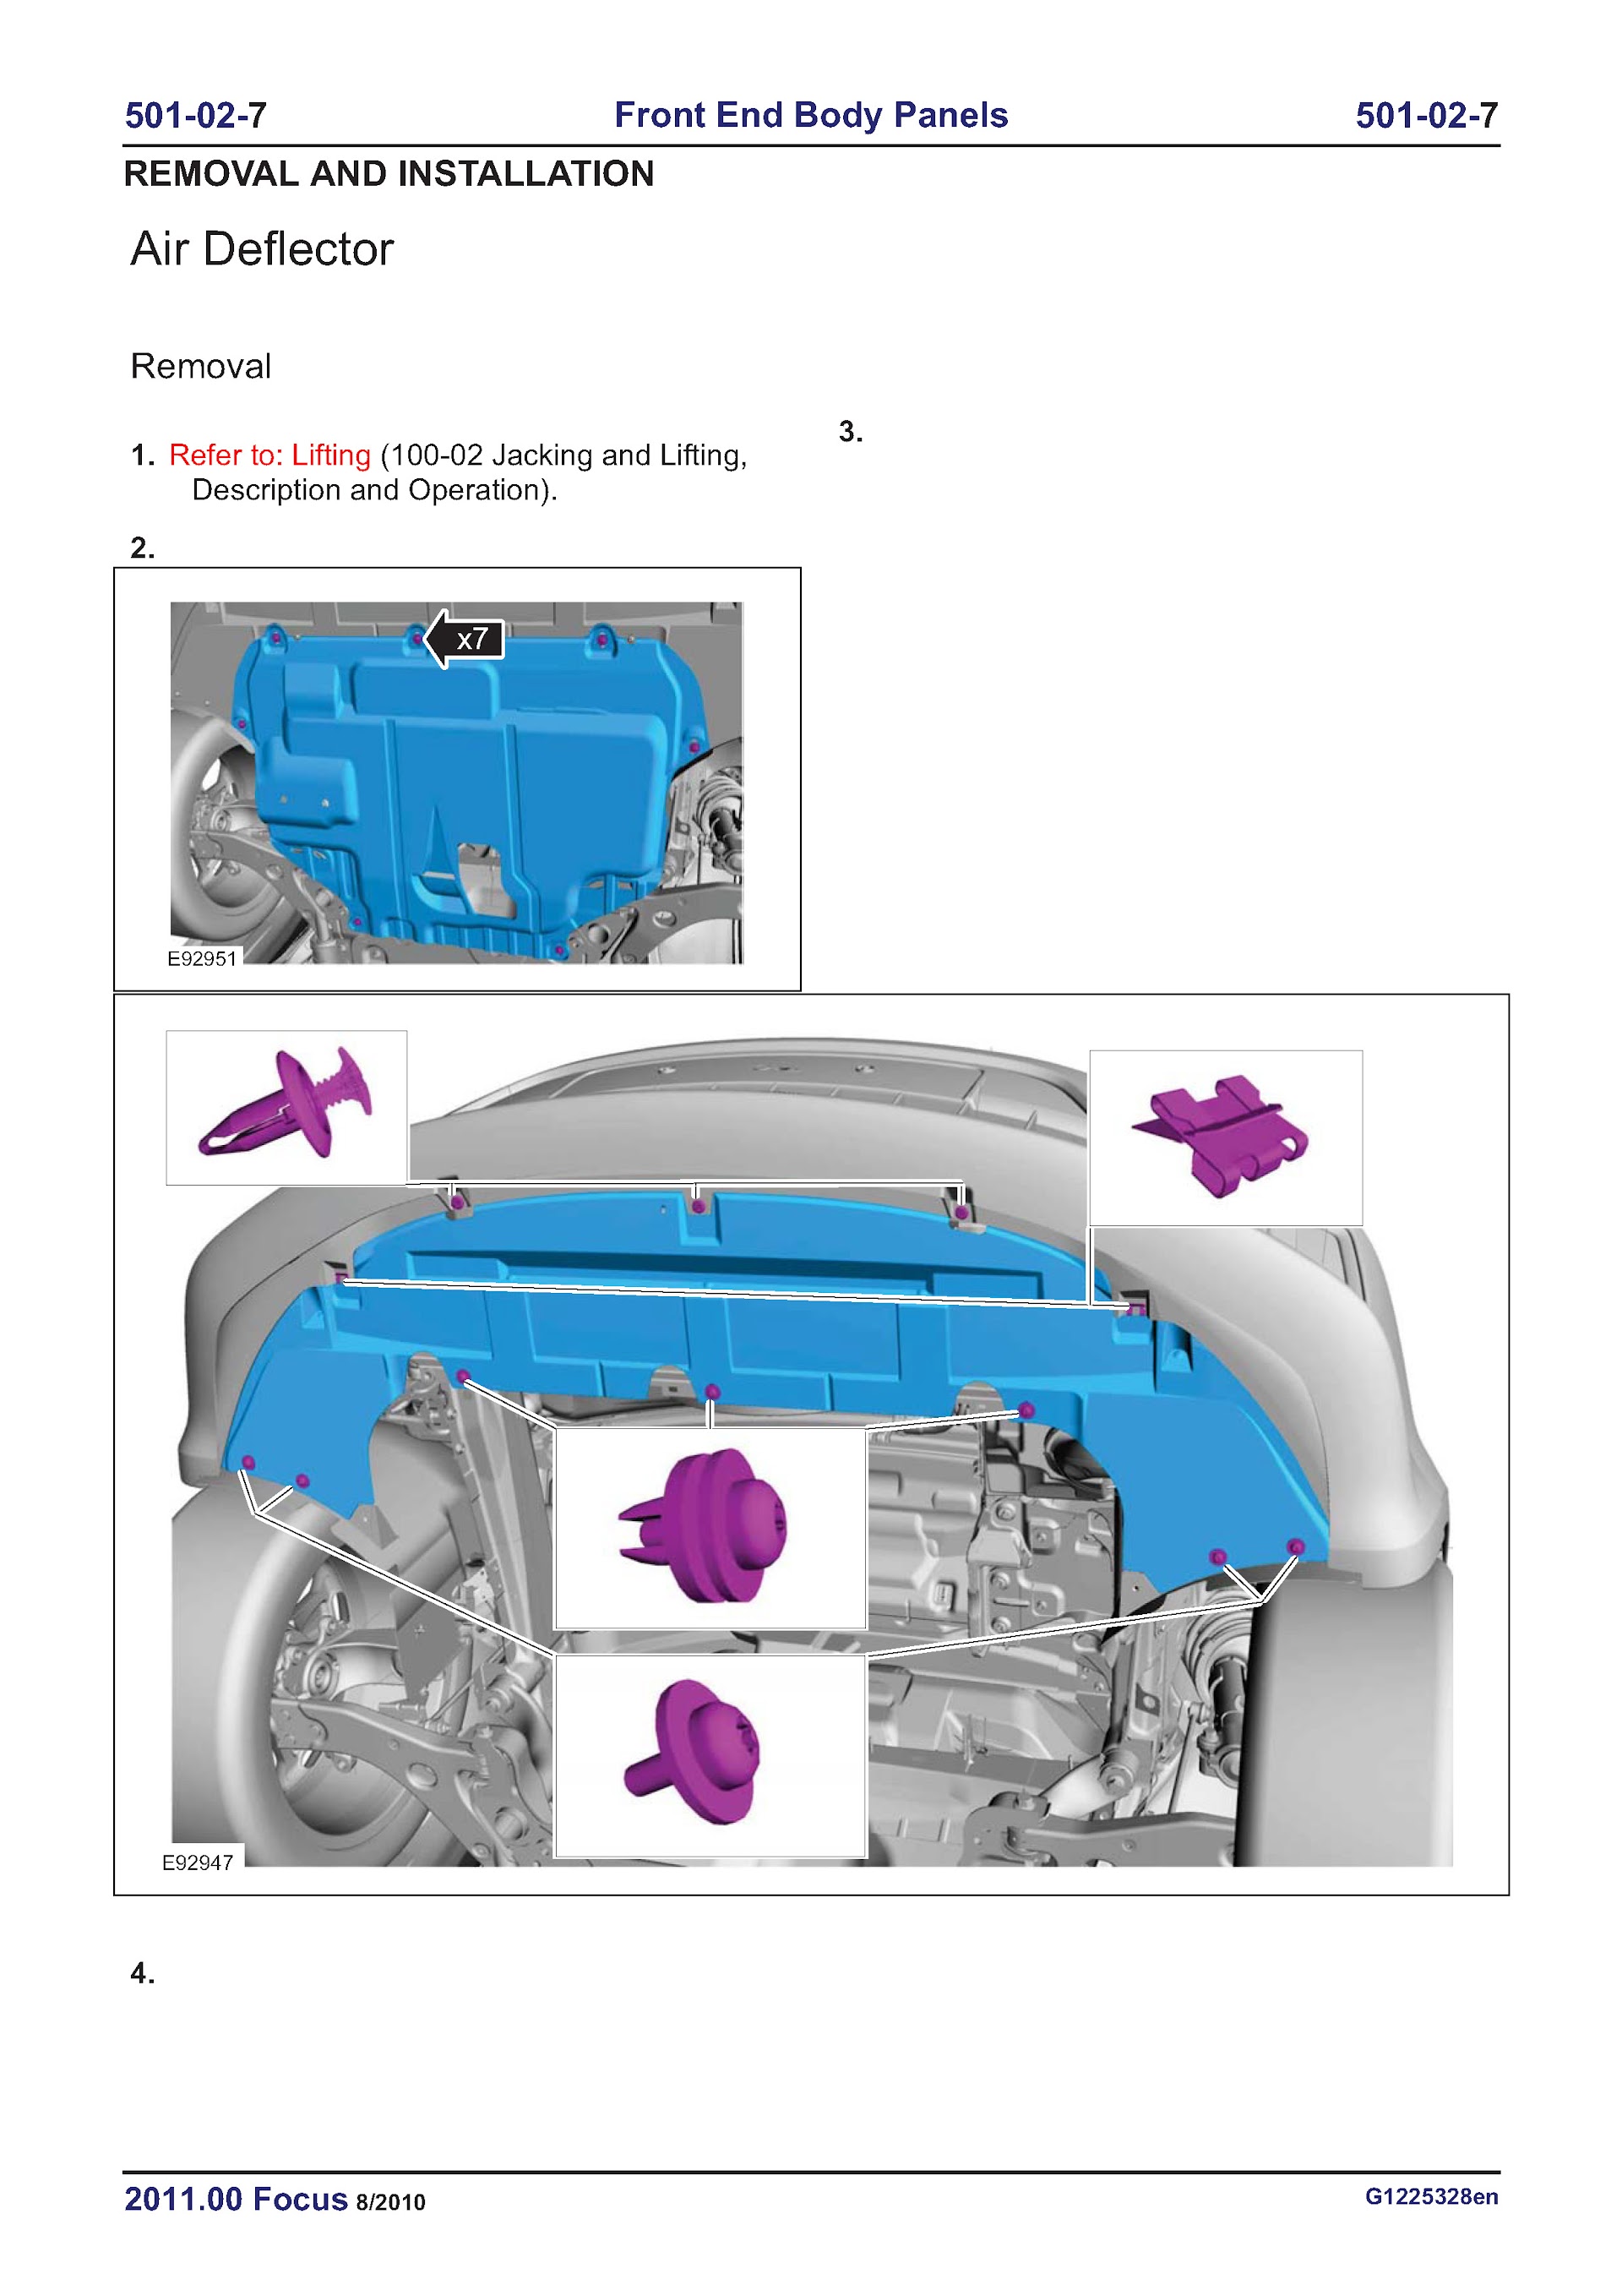 Ford Focus Repair Manual (2012-2013), Front and Body Panel Removal and Installation